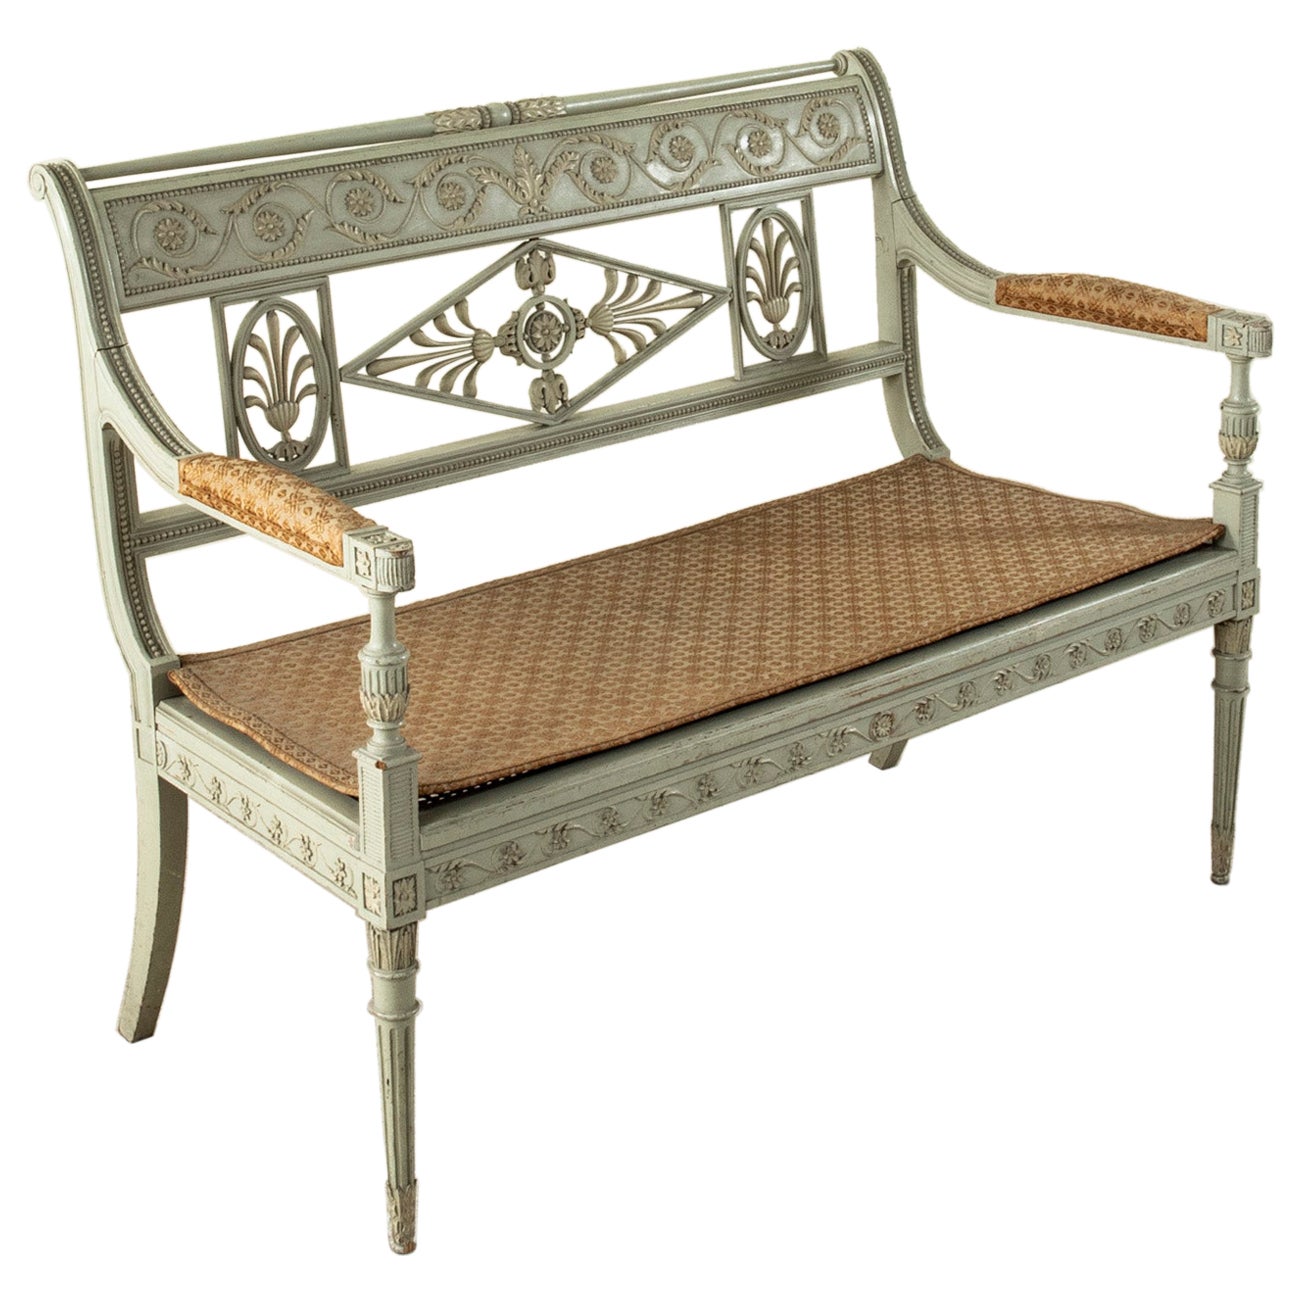 Early 20th Century French Directoire Style Painted Ash Banquette, Settee For Sale